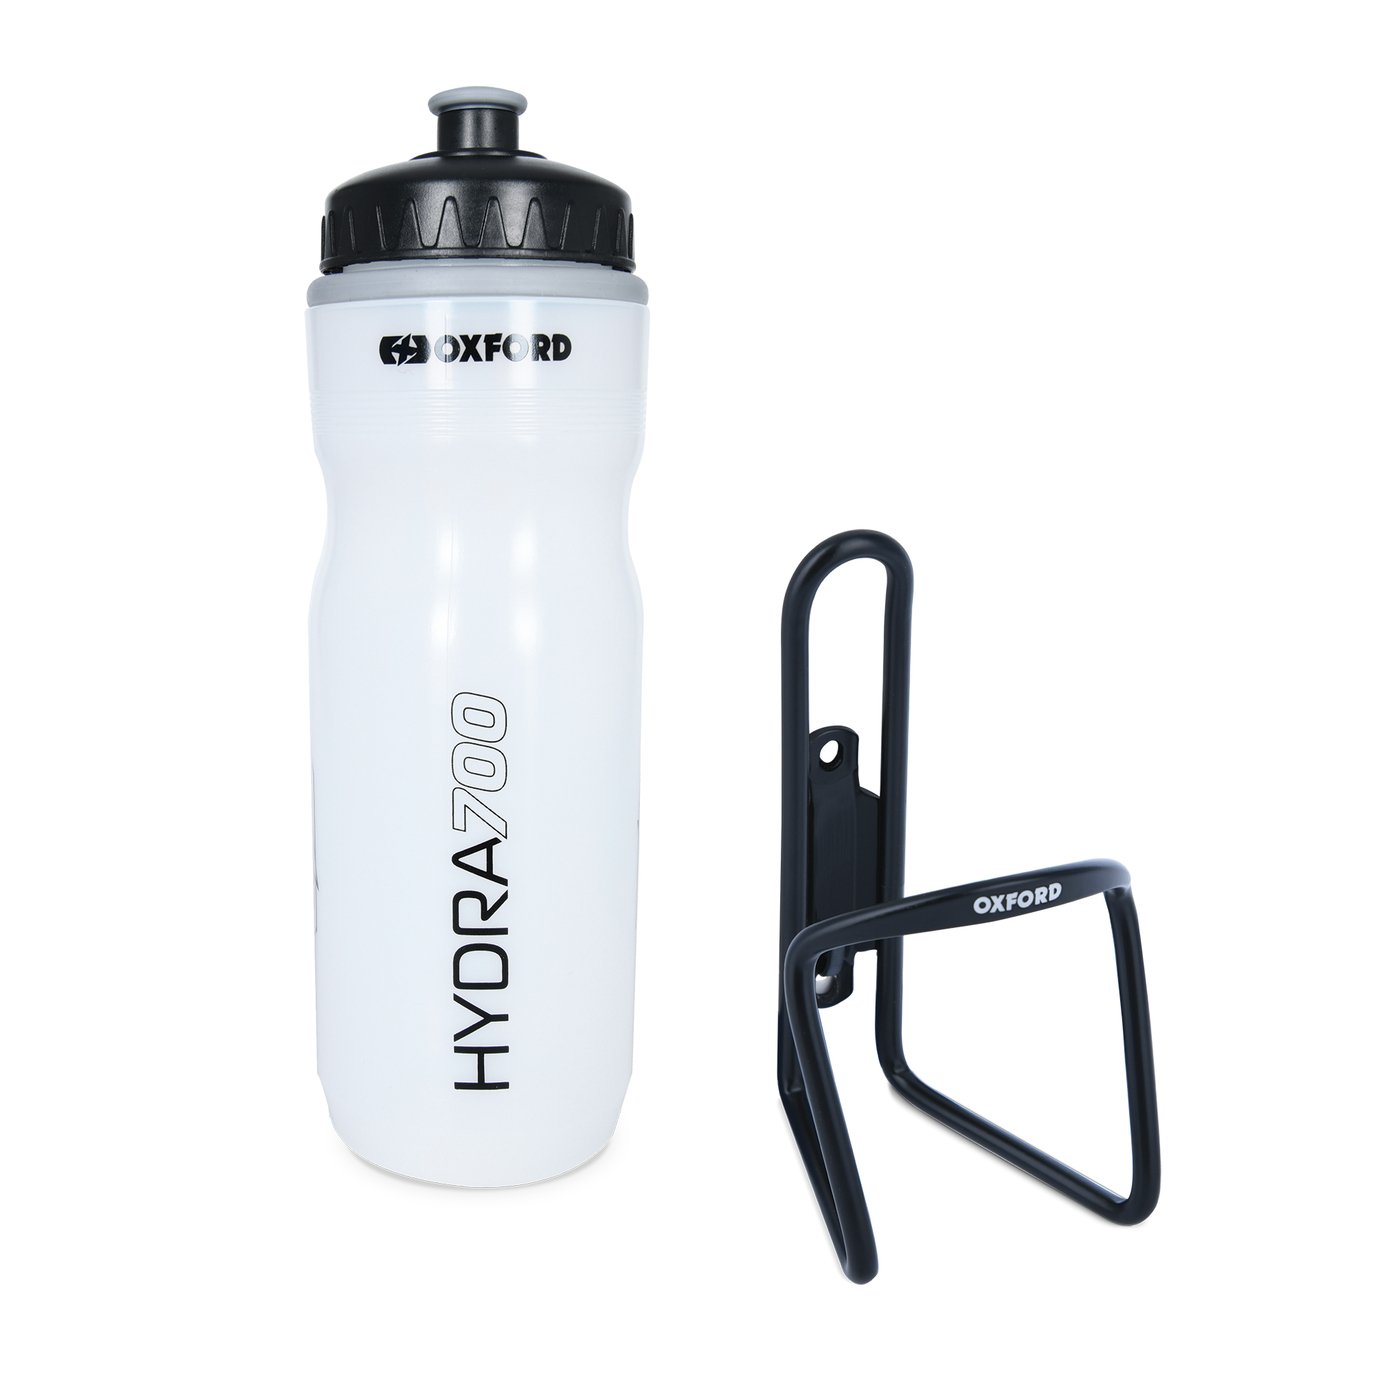 Oxford Bottle Cage And Bottle Set Review